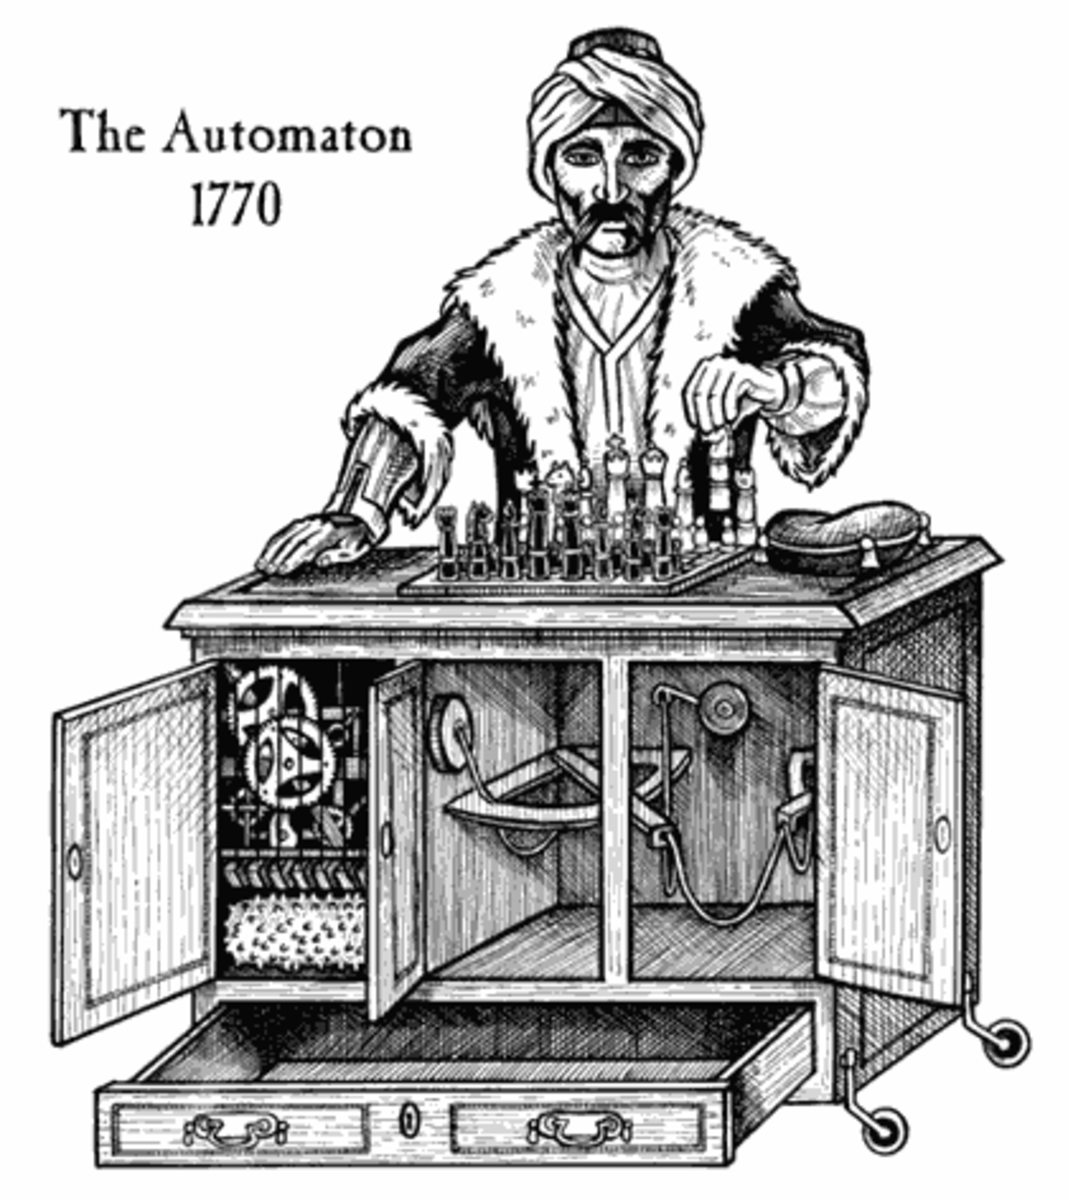 AUTOMATON FROM 1770 "THE TURK"